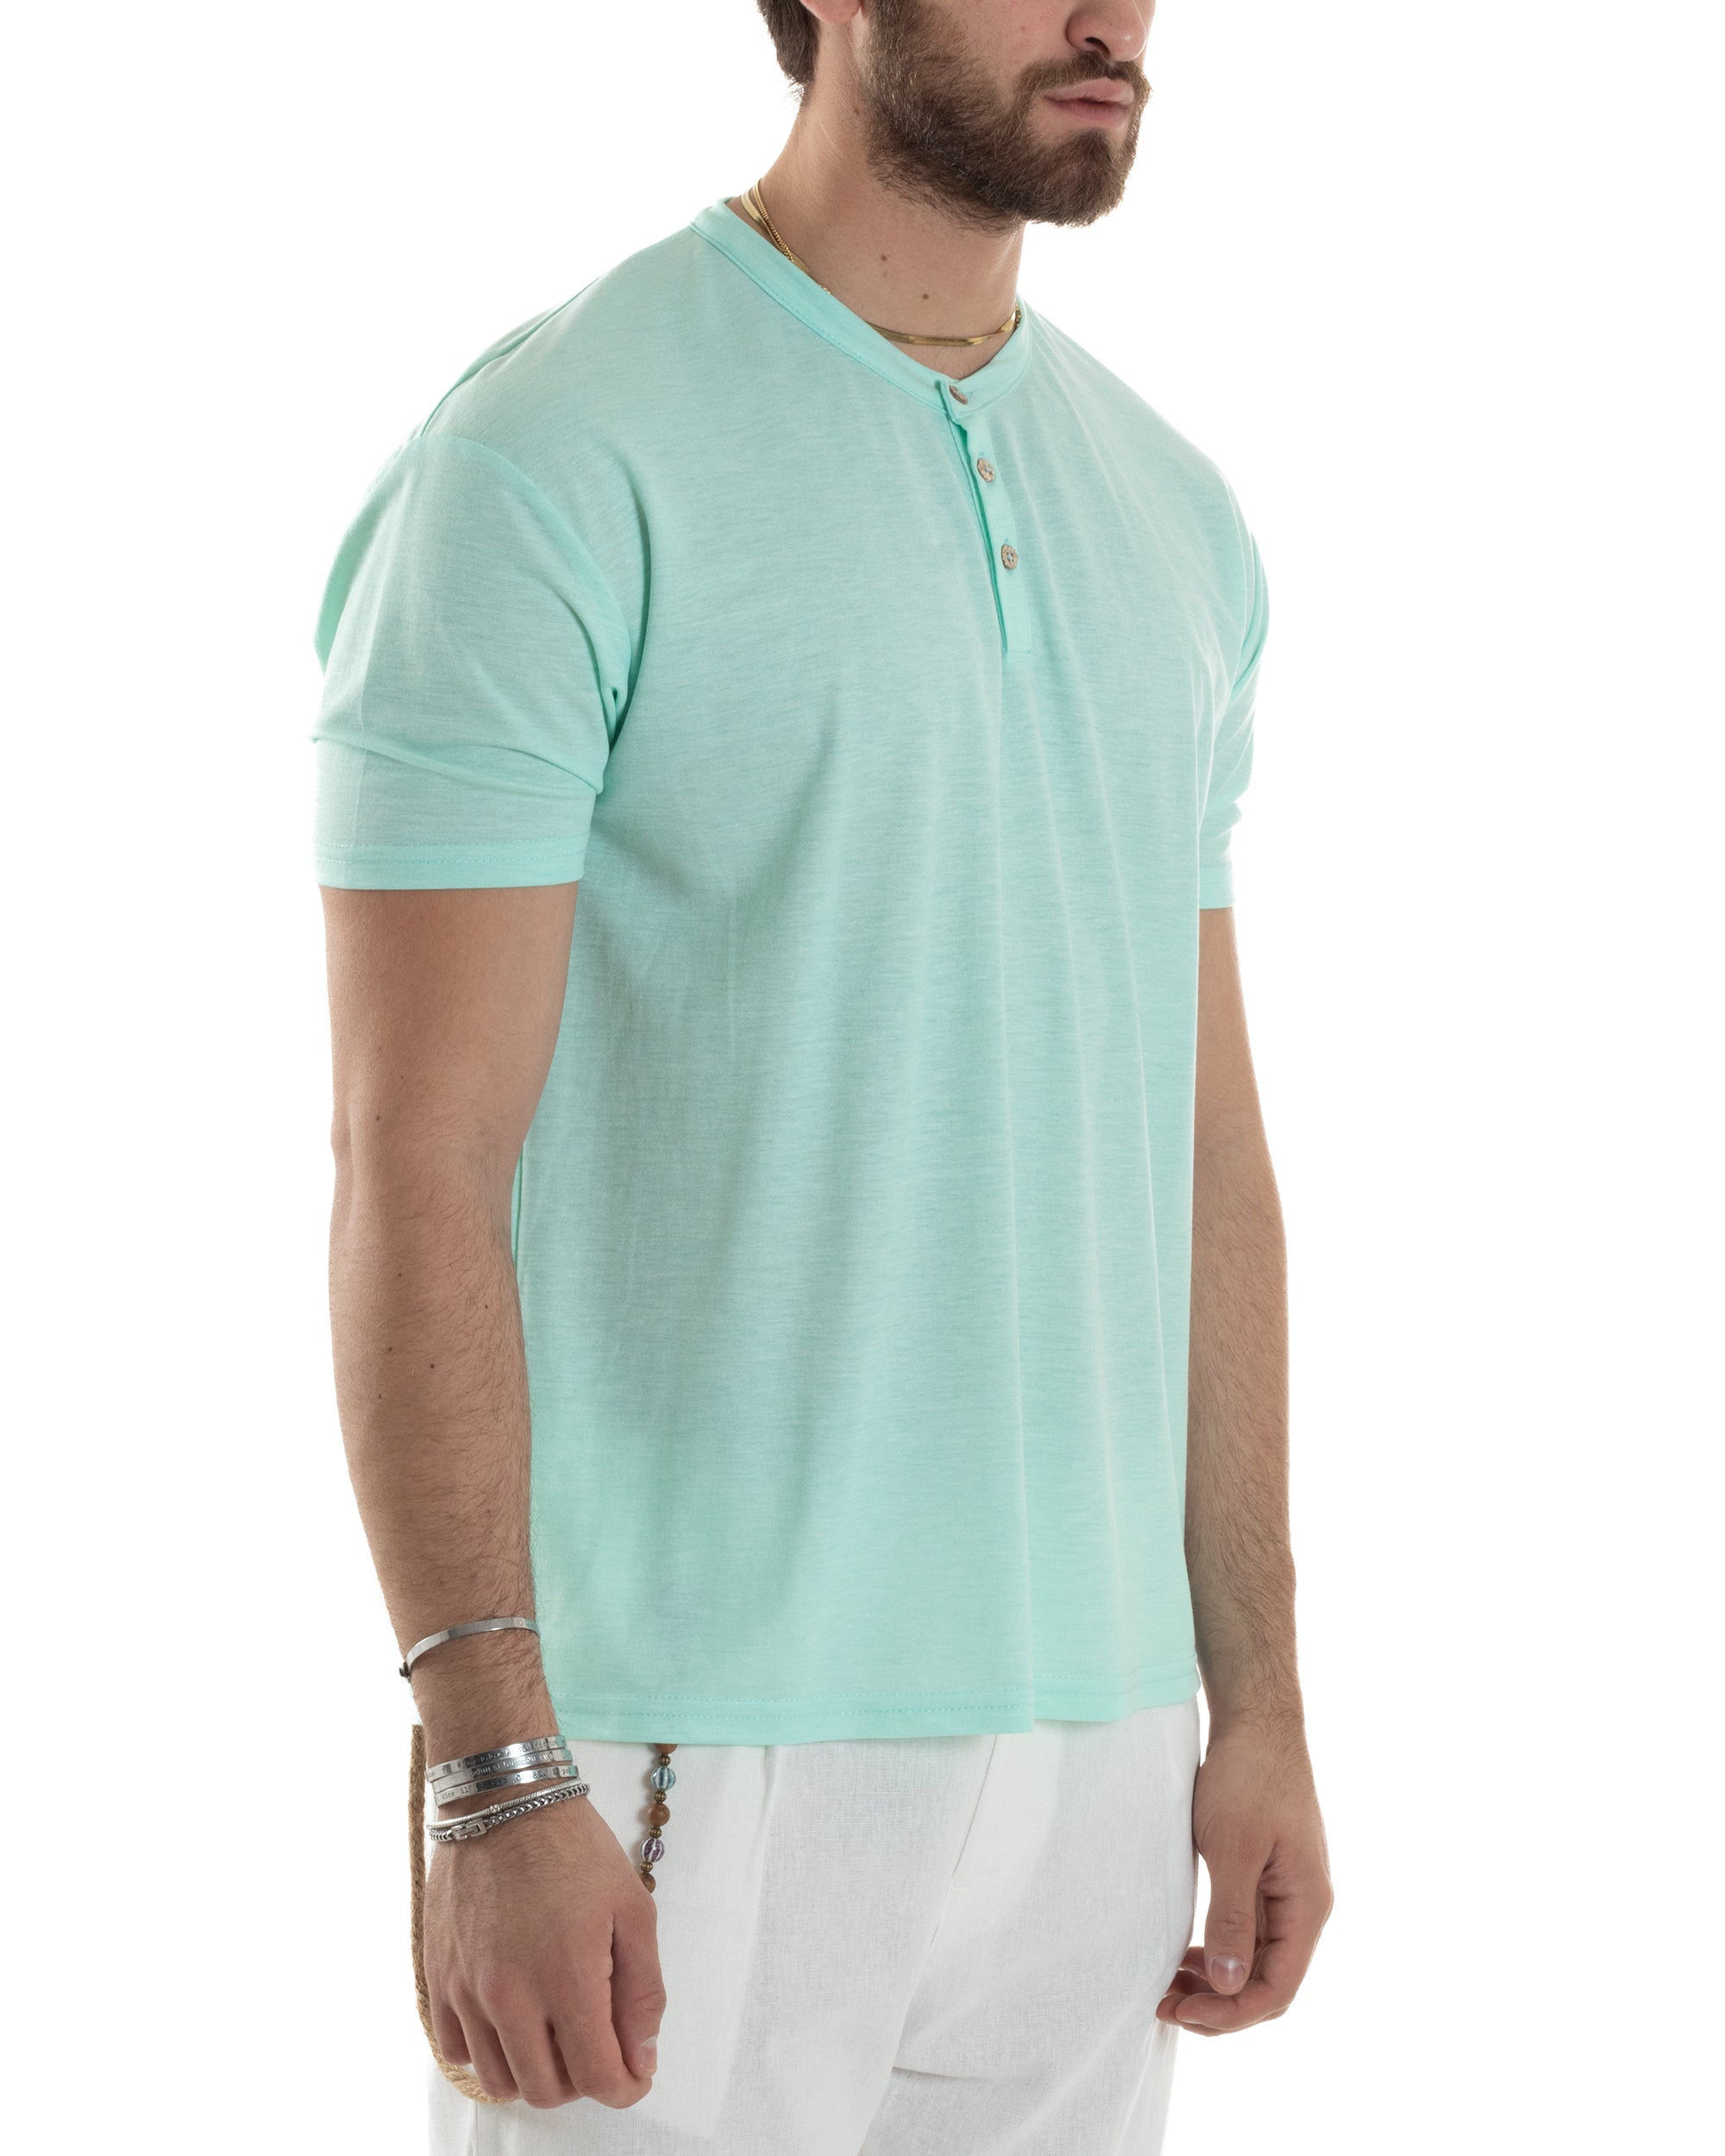 Men's T-shirt Seraph Collar Buttons Solid Color Short Sleeve Cotton Blue Casual GIOSAL-TS2959A